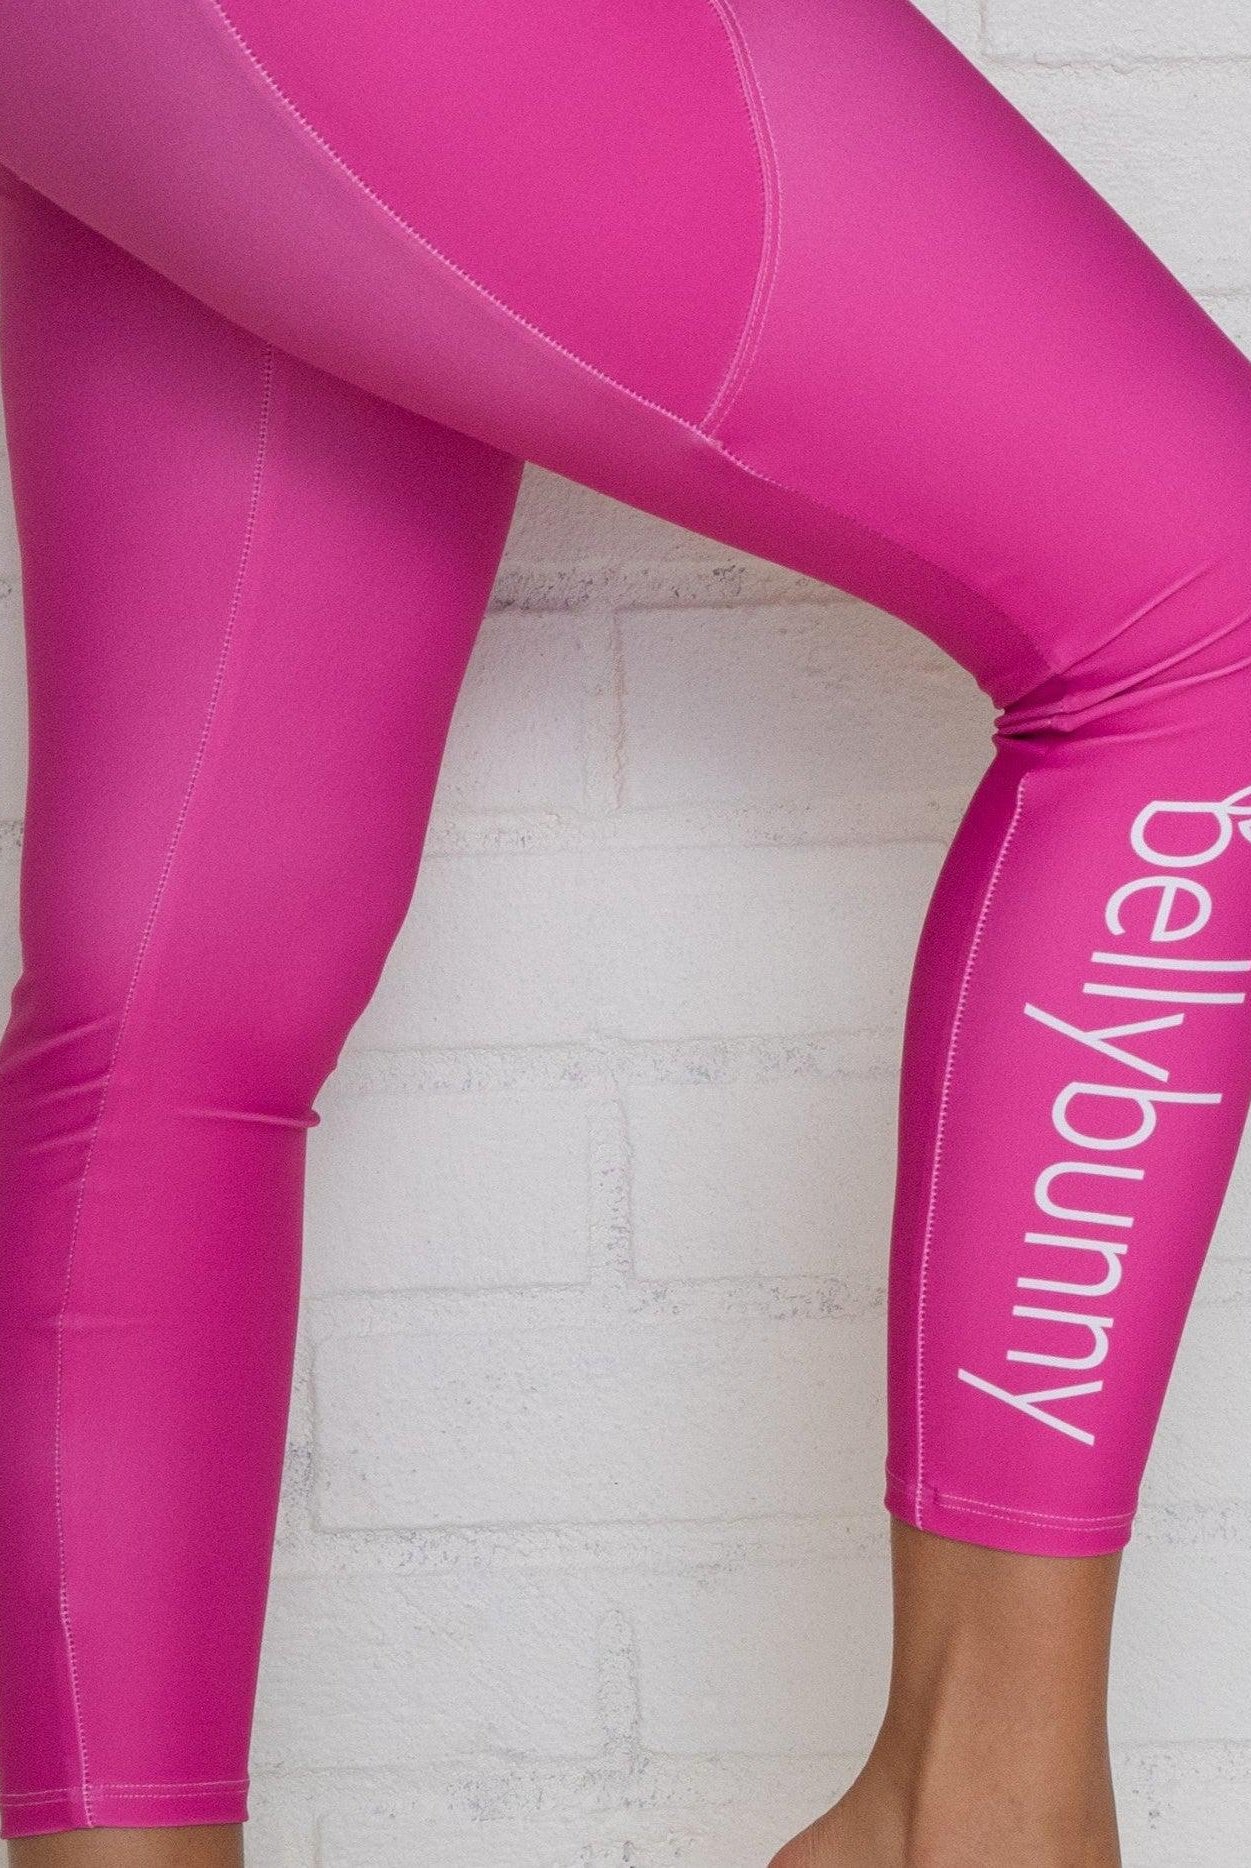 Bellybunny-Women's Crossover Leggings-Pink with White Logo